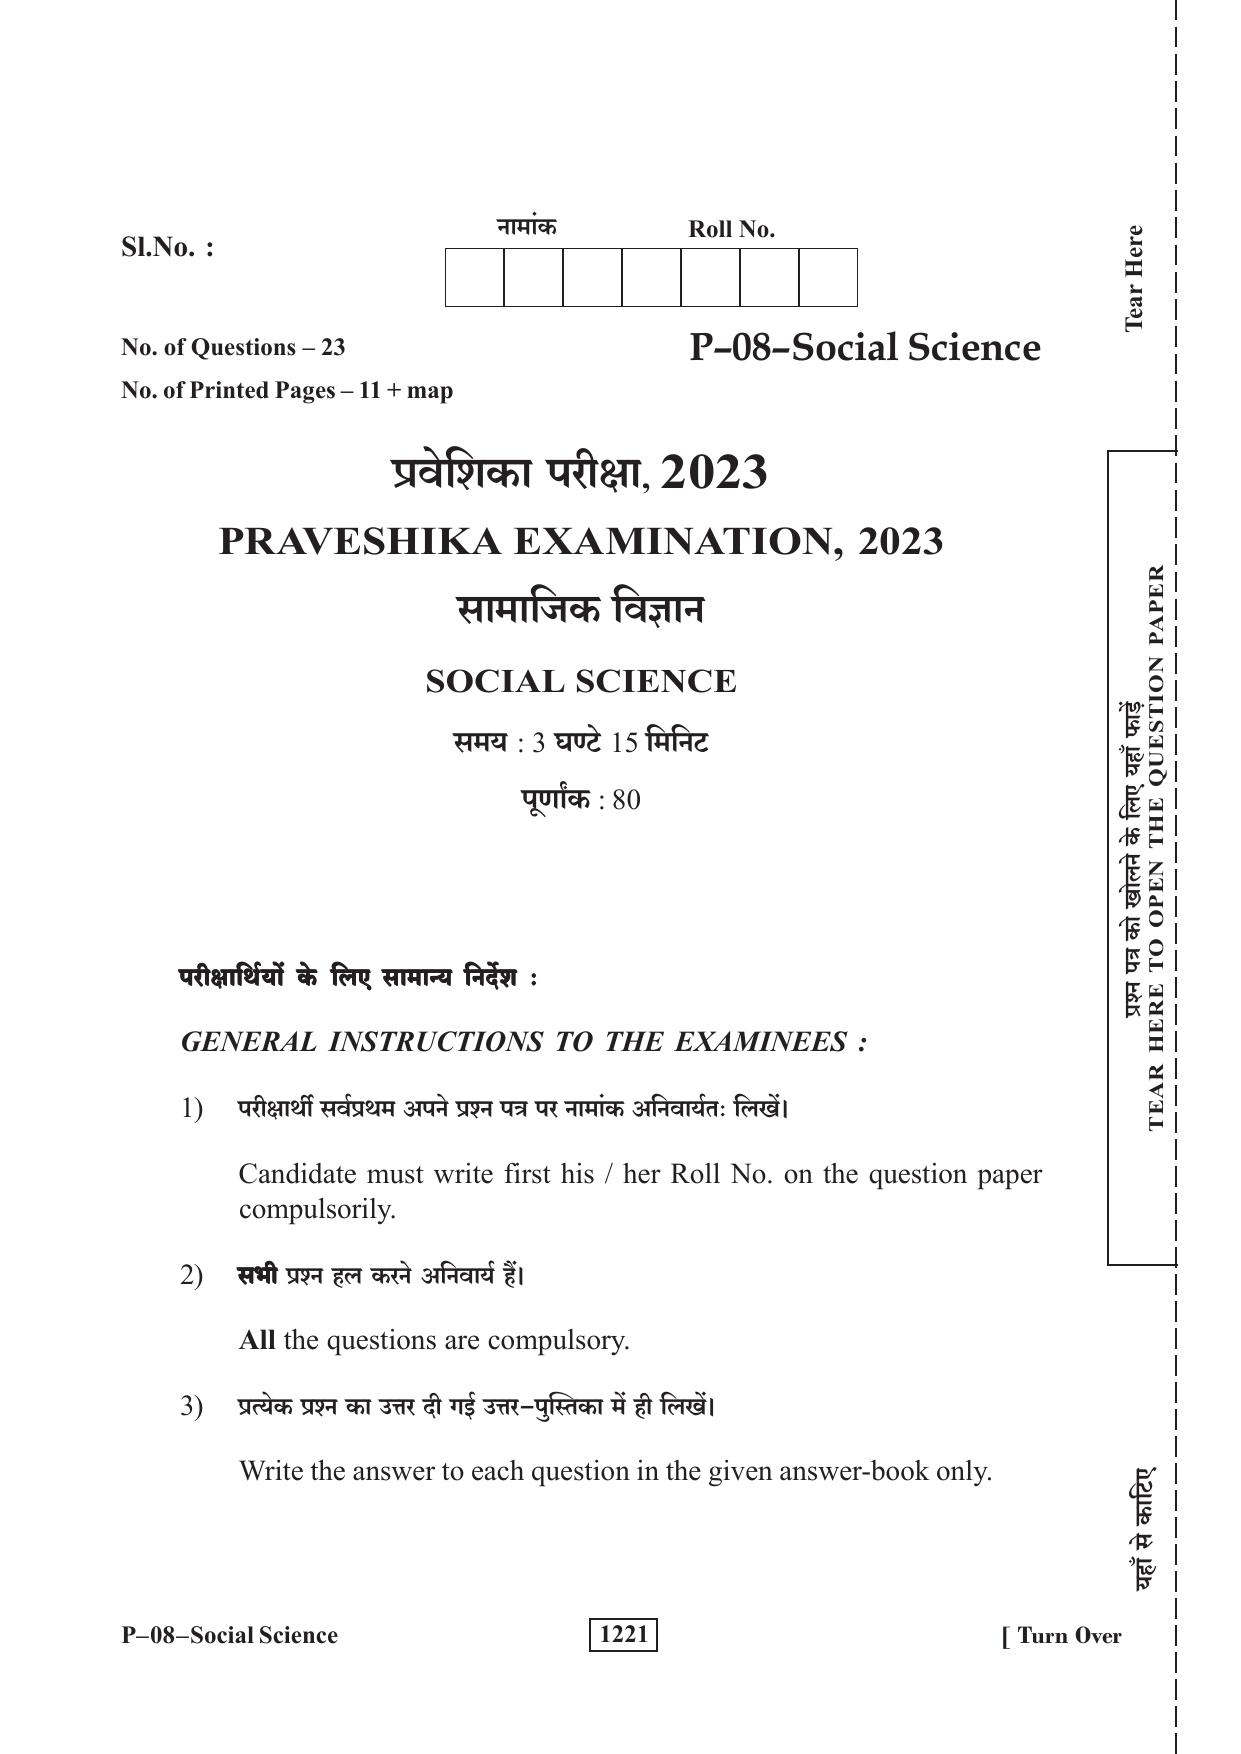 RBSE 2023 Social Science Praveshika Question Paper - Page 1